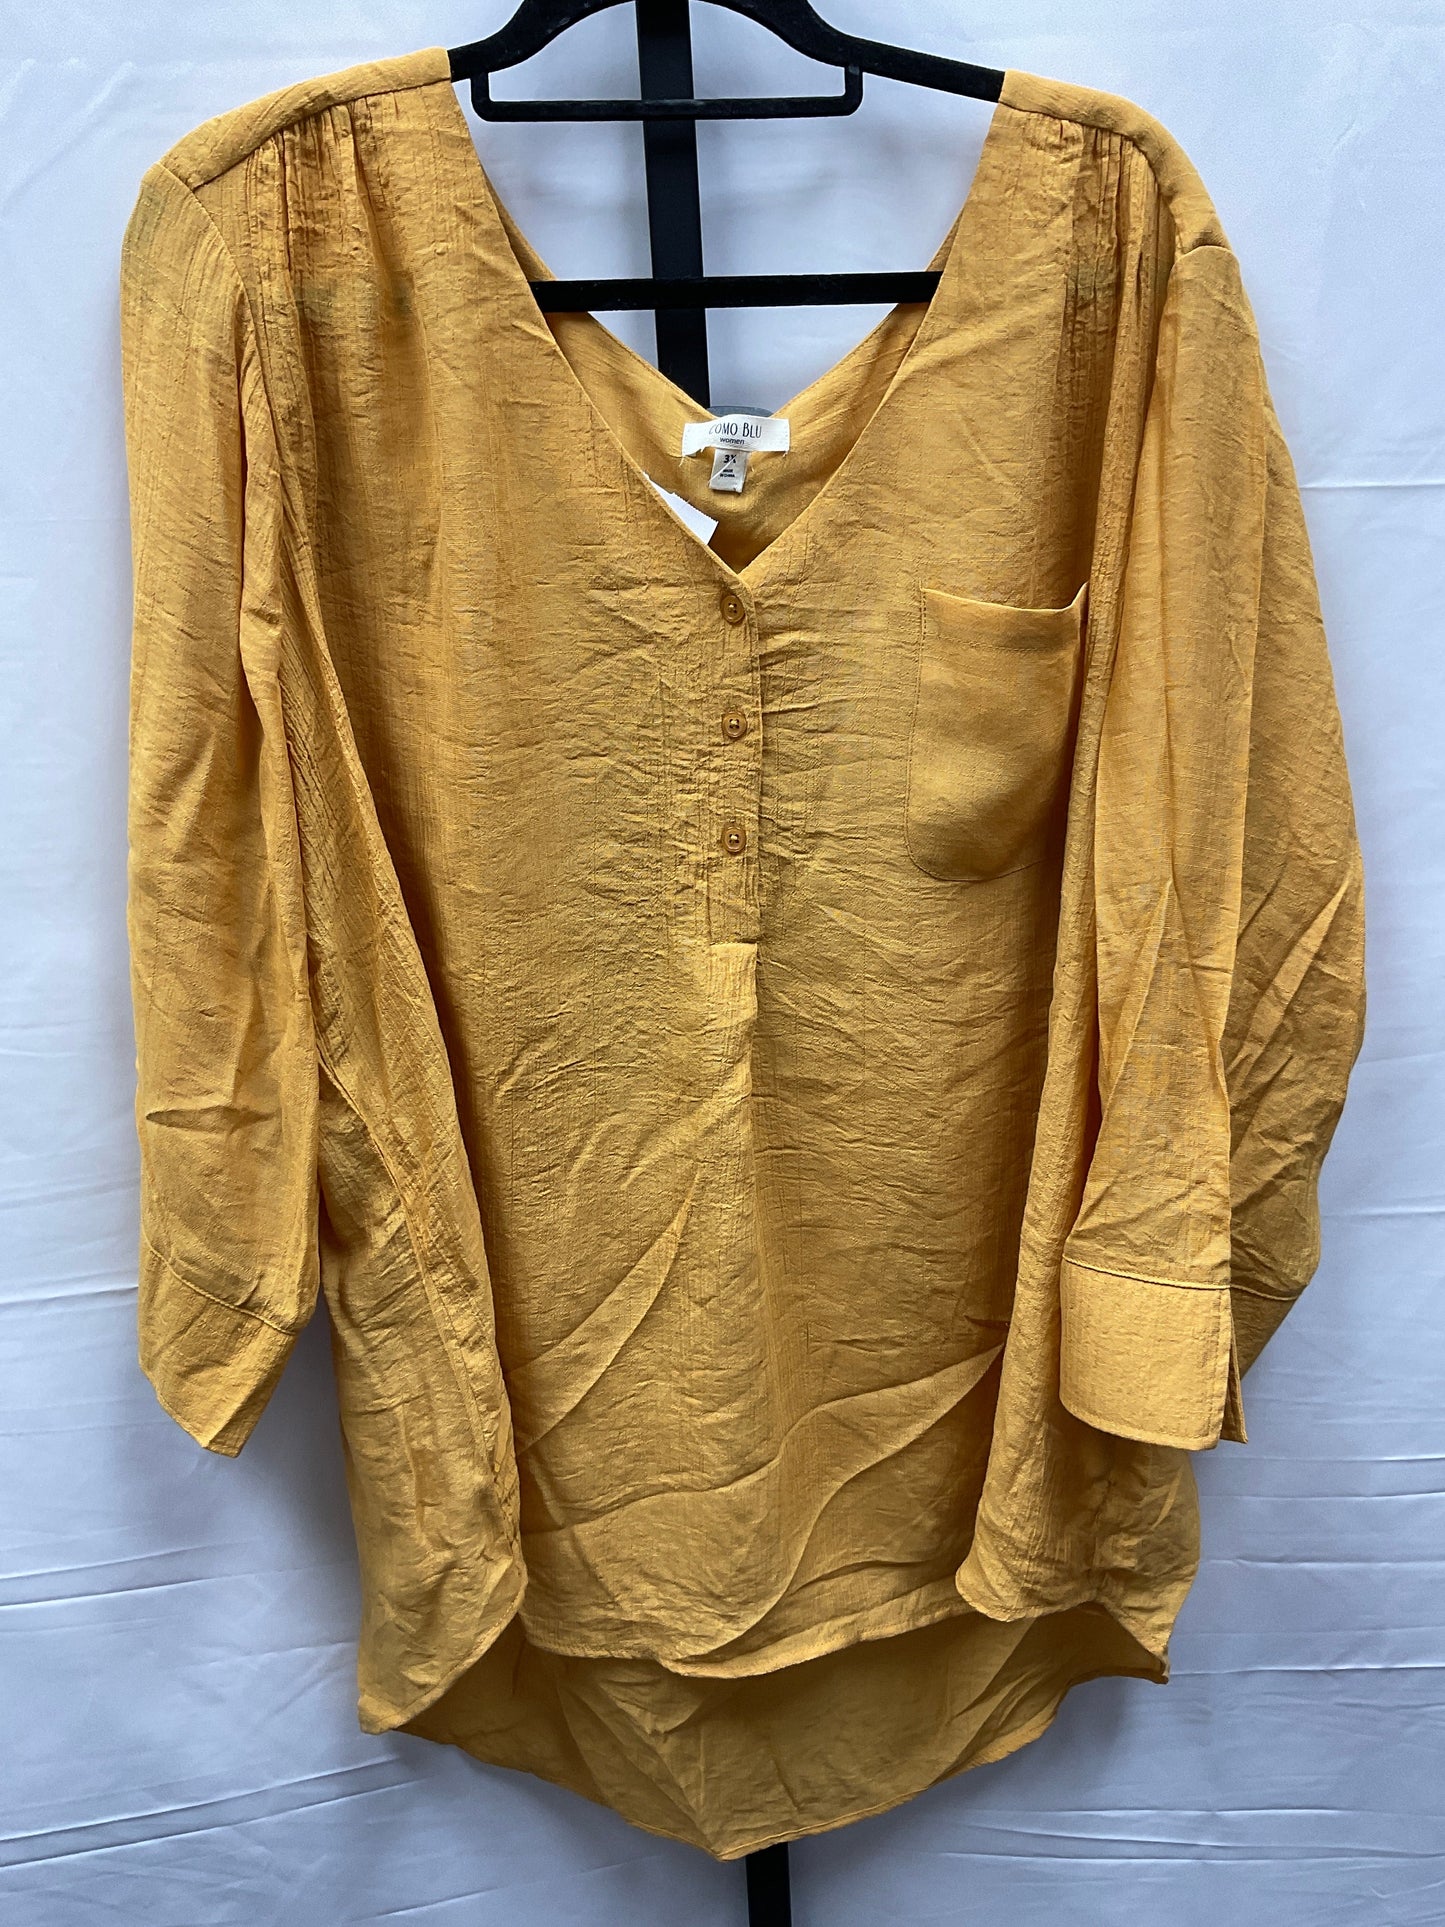 Yellow Top Long Sleeve Clothes Mentor, Size 3x